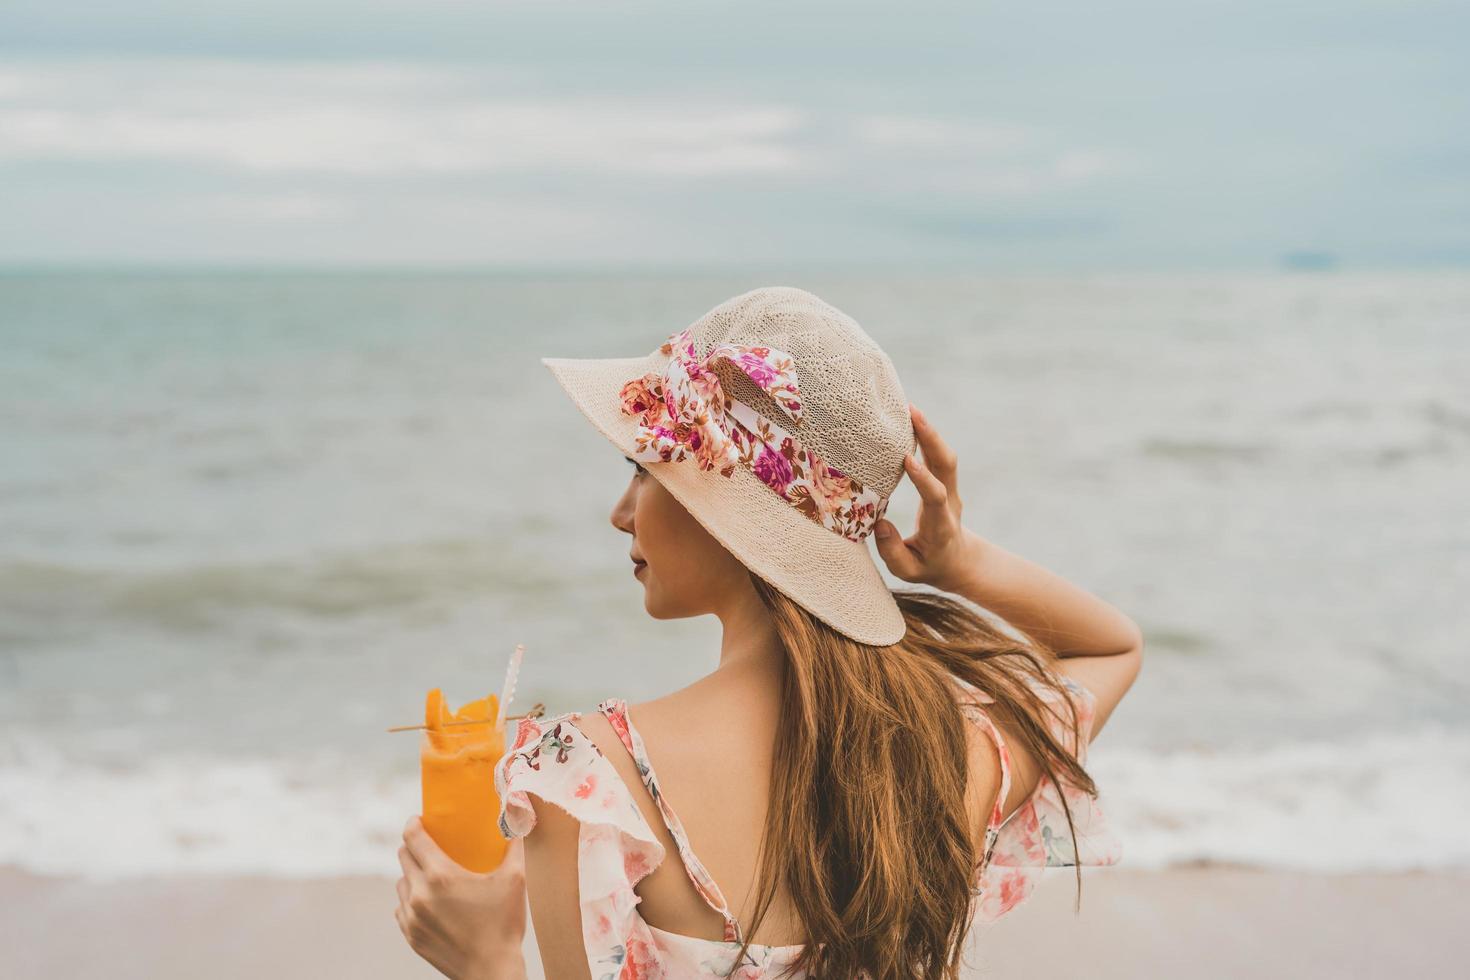 Relax woman drinking refresh orange cocktail on the beach photo